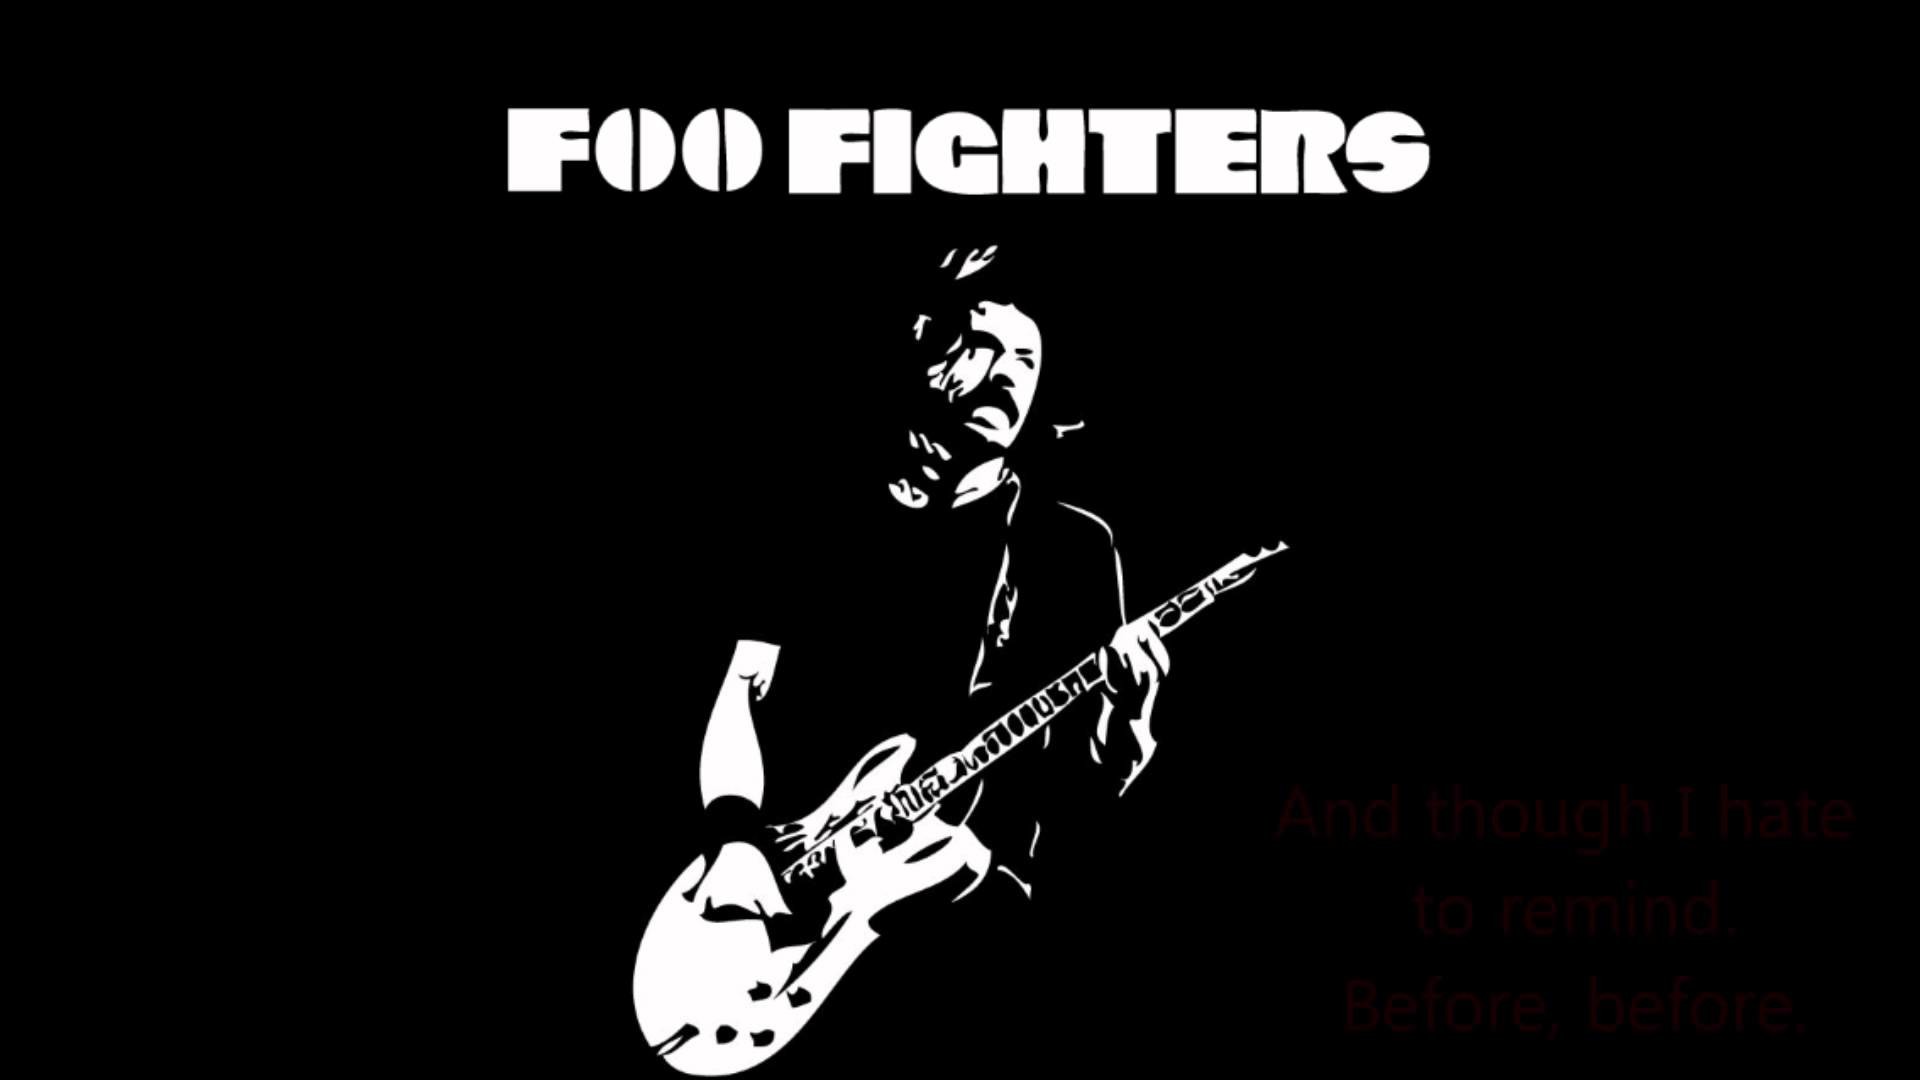 Foo Fighters wallpaper by paulg13  Download on ZEDGE  4dae